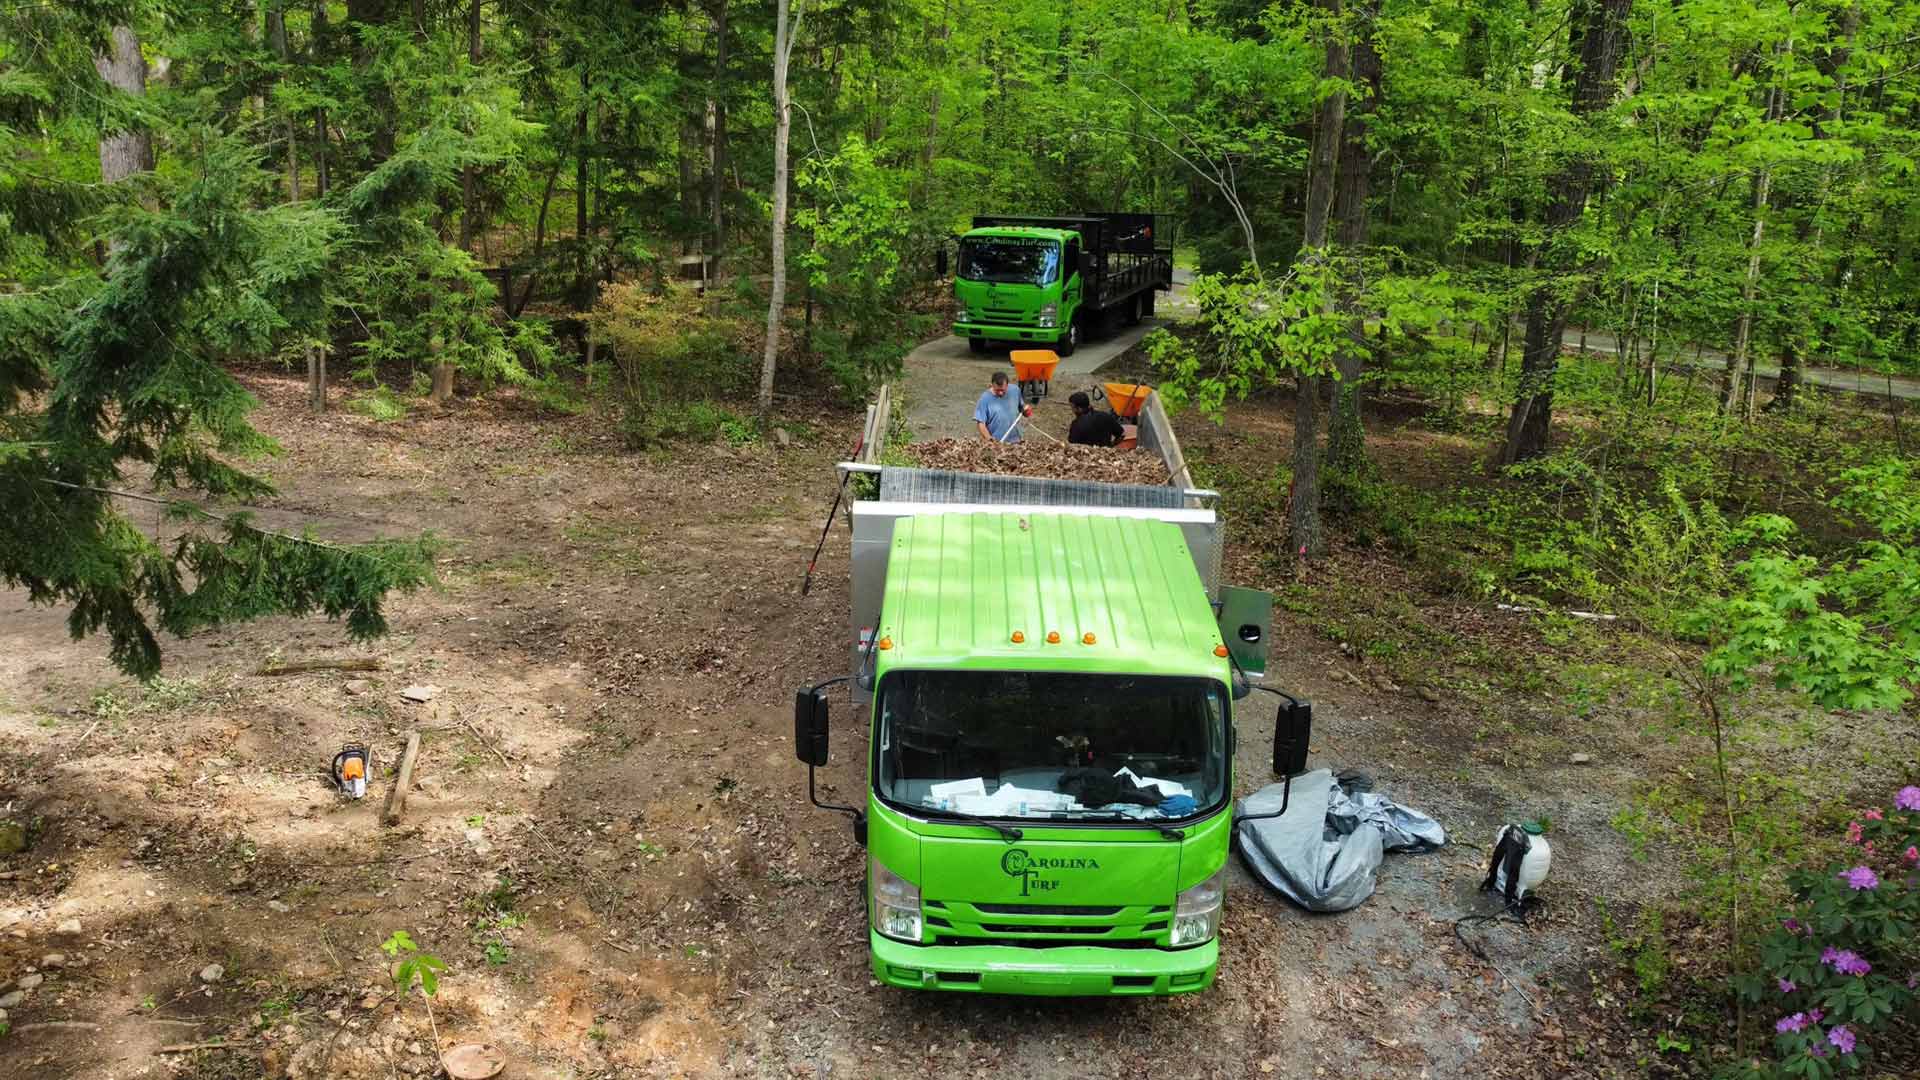 A landscaping crew loading leaves and debris into a company truck near Ballantyne, NC.